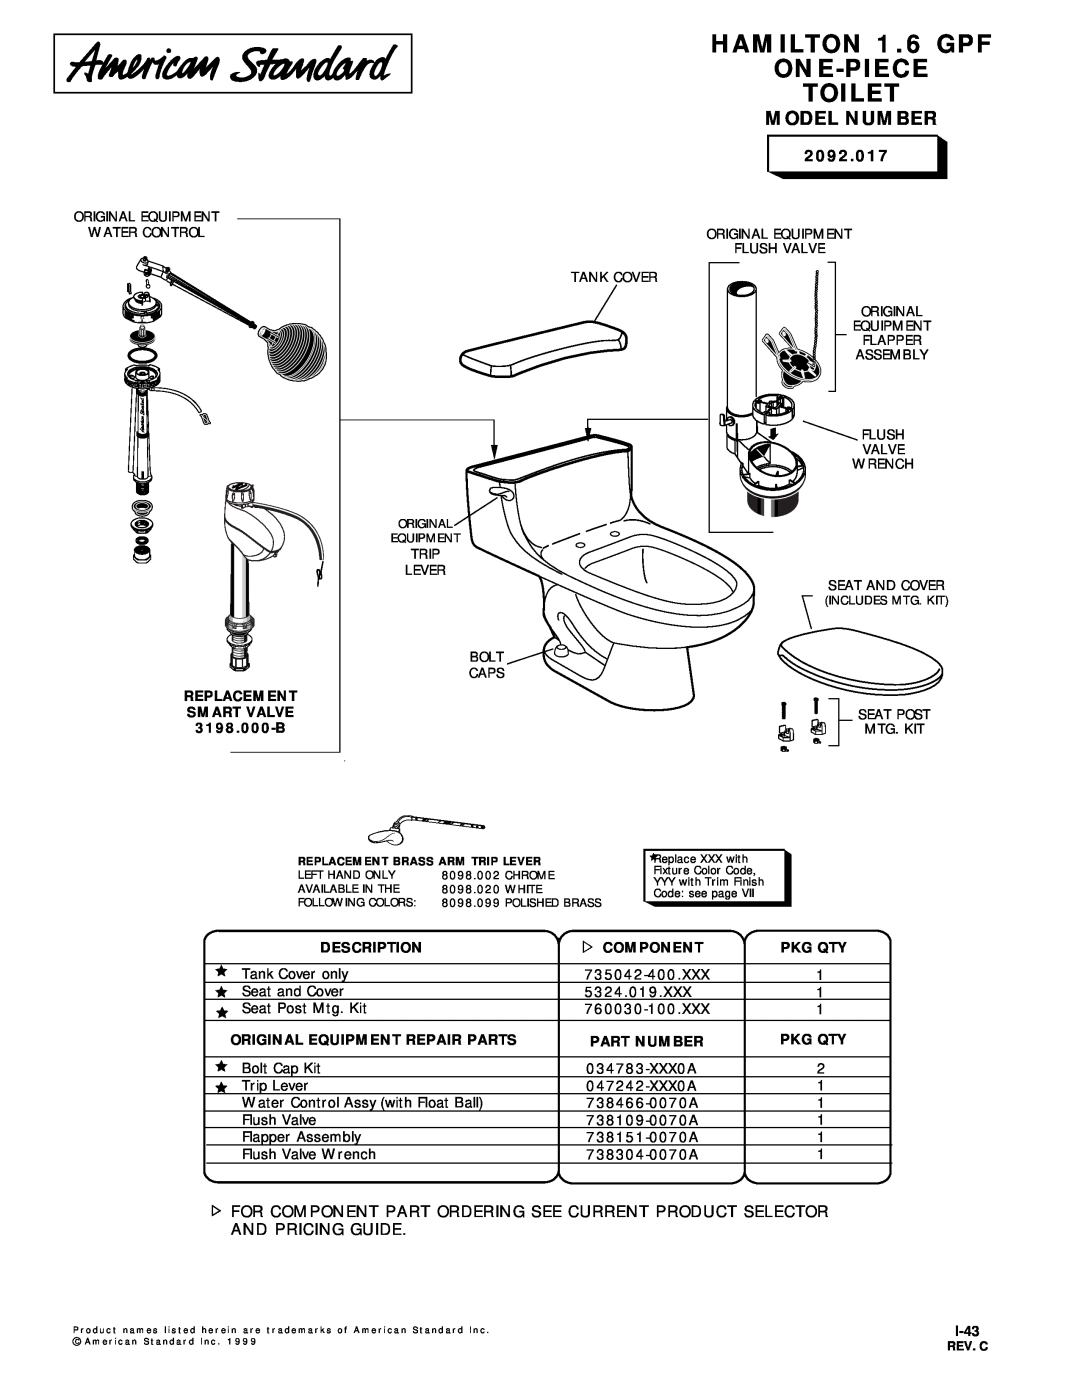 American Standard 2092.017 manual HAMILTON 1.6 GPF ONE-PIECE TOILET, Model Number, Replacement, Smart Valve, 3198.000-B 